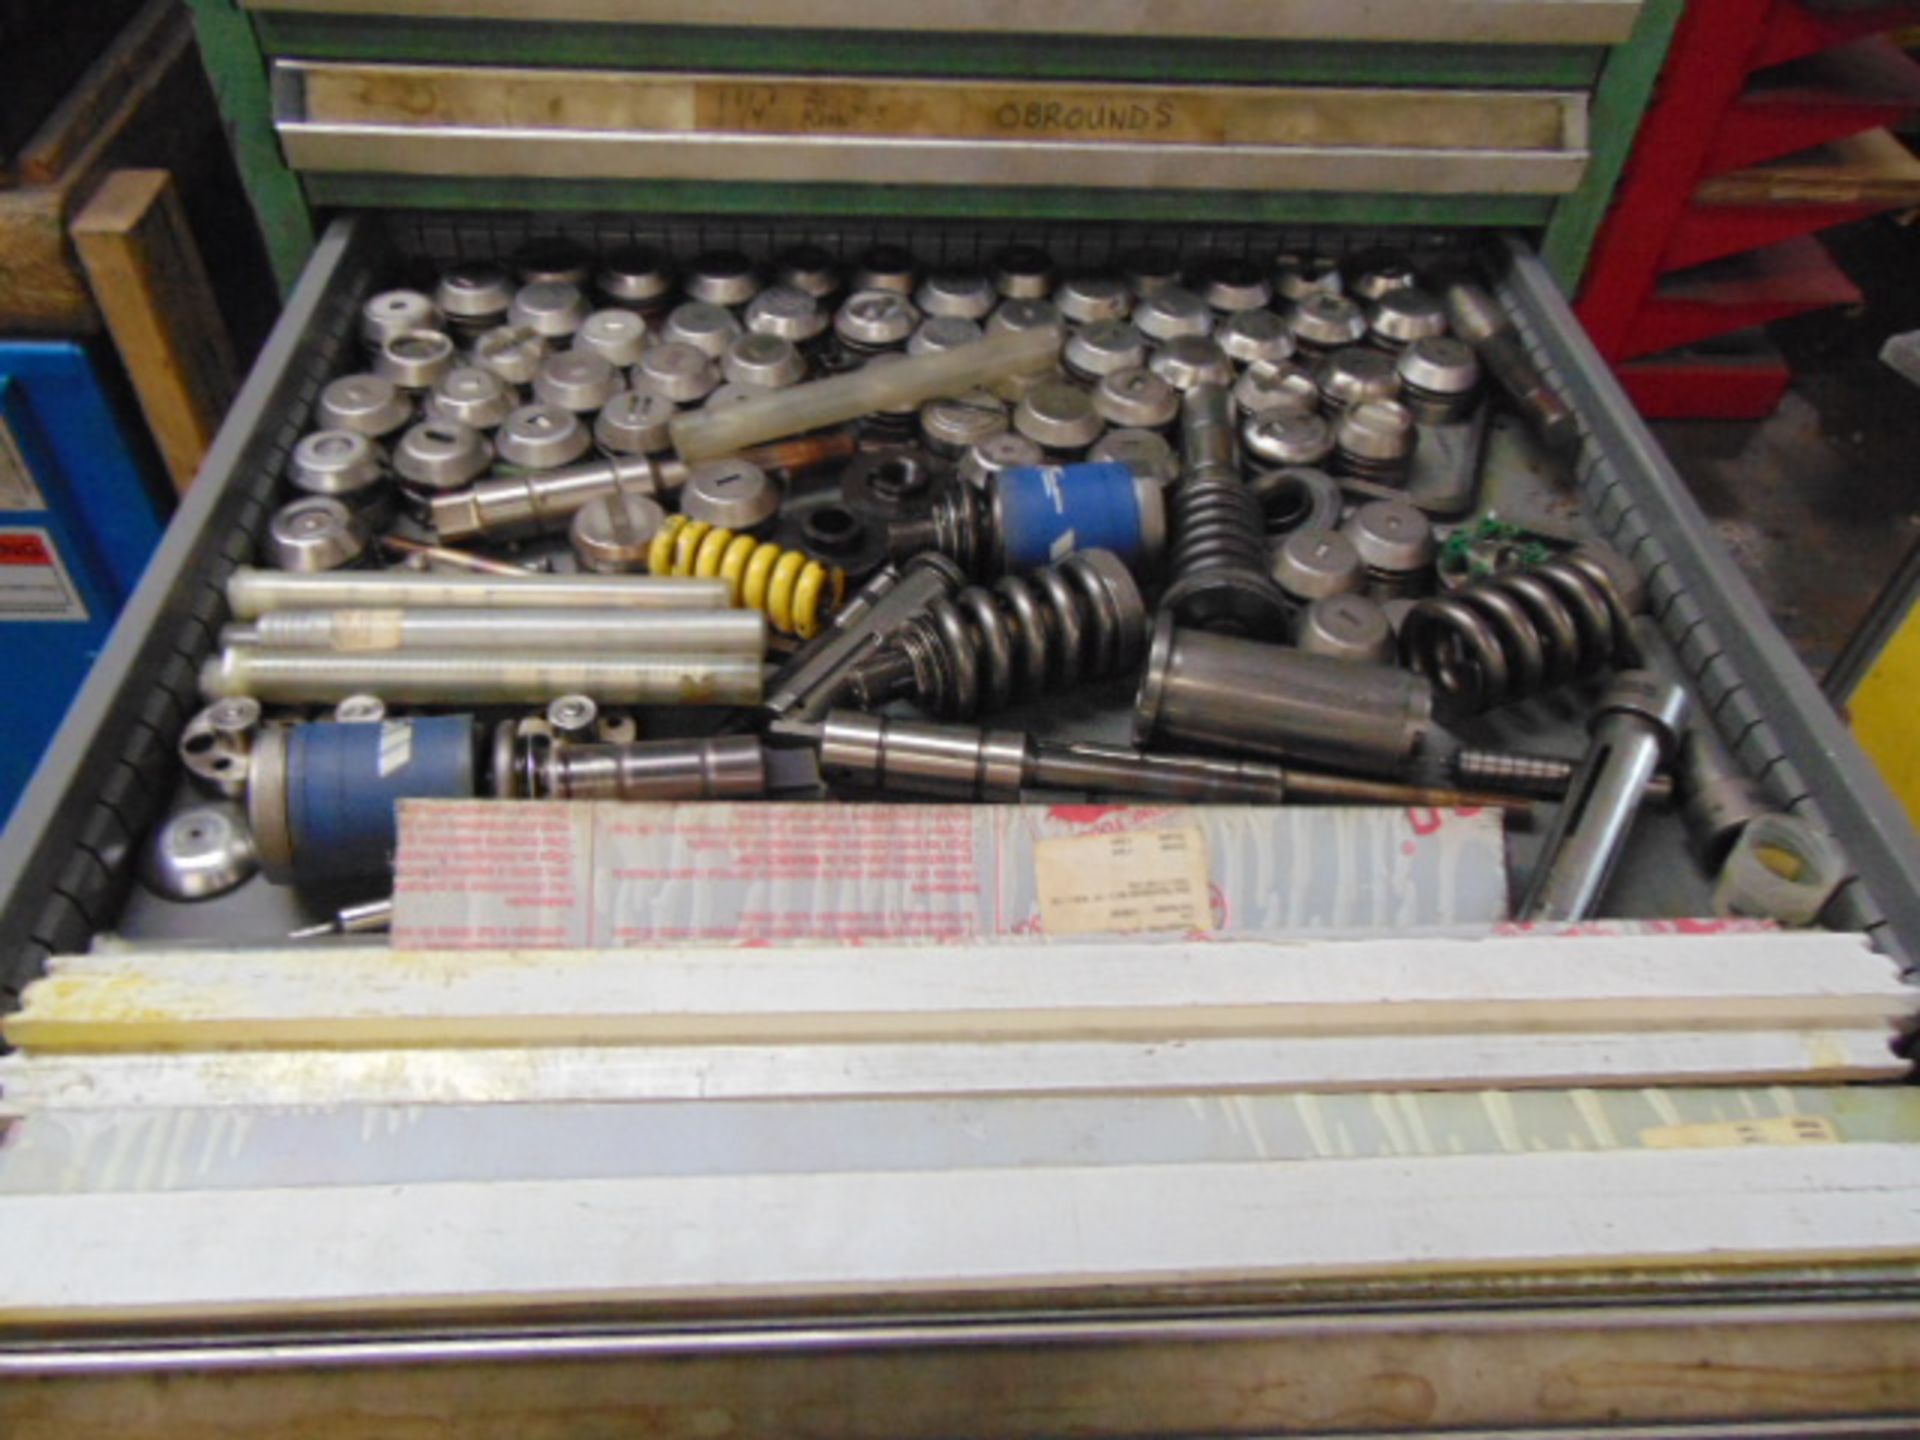 LOT OF PUNCH & DIE TOOLING, assorted, w/ tool cabinet - Image 4 of 7